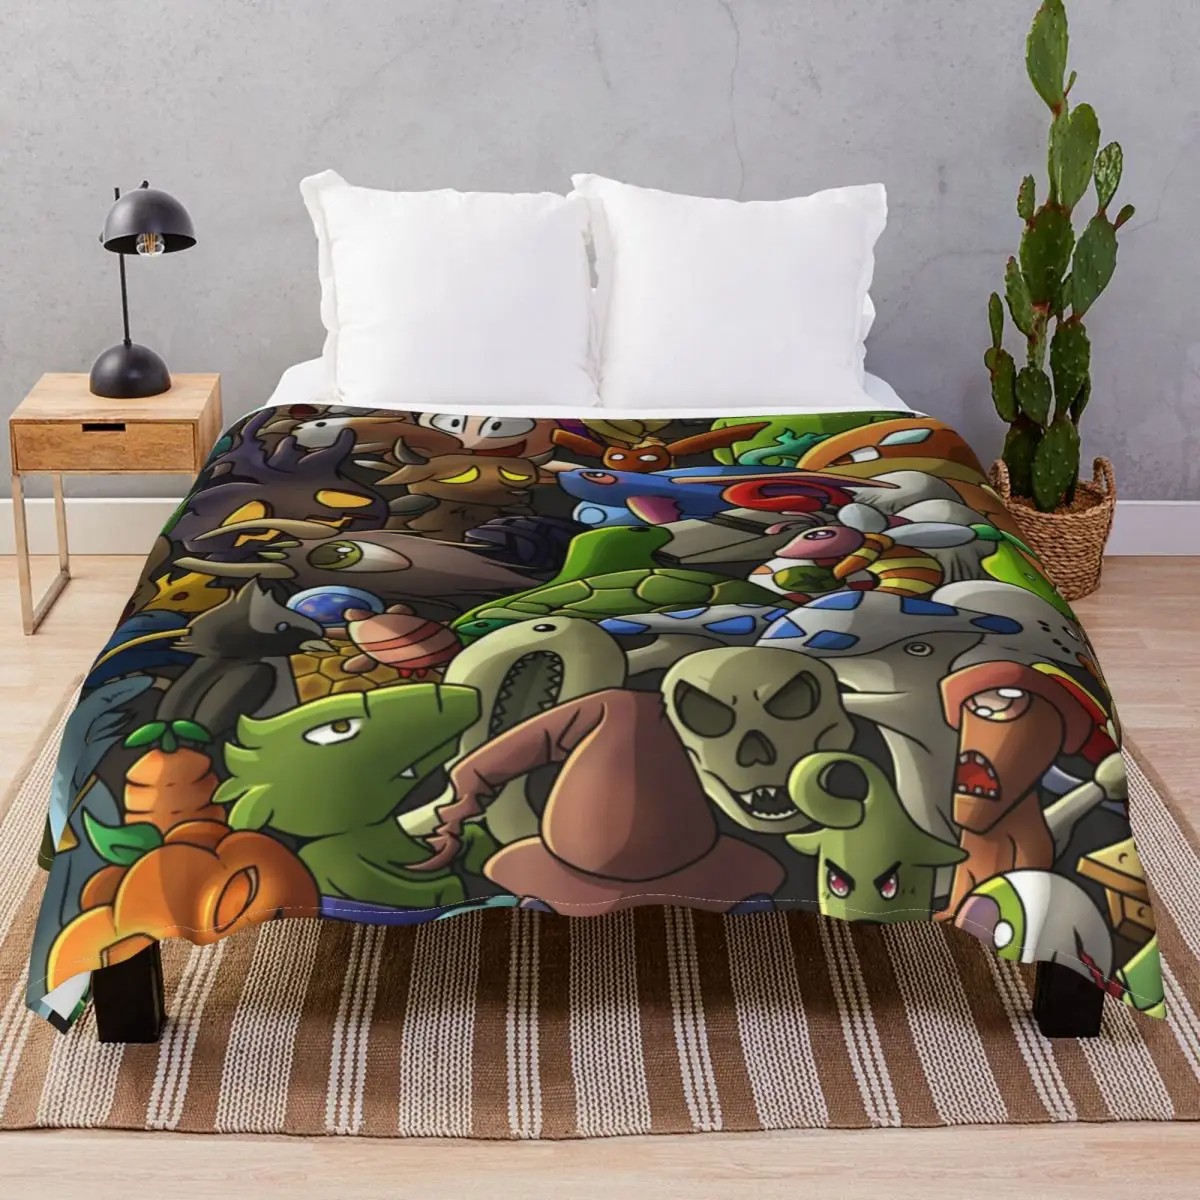 ALL TERRARIA PETS Digital Blankets Fleece Decoration Portable Throw Blanket for Bed Home Couch Travel Cinema